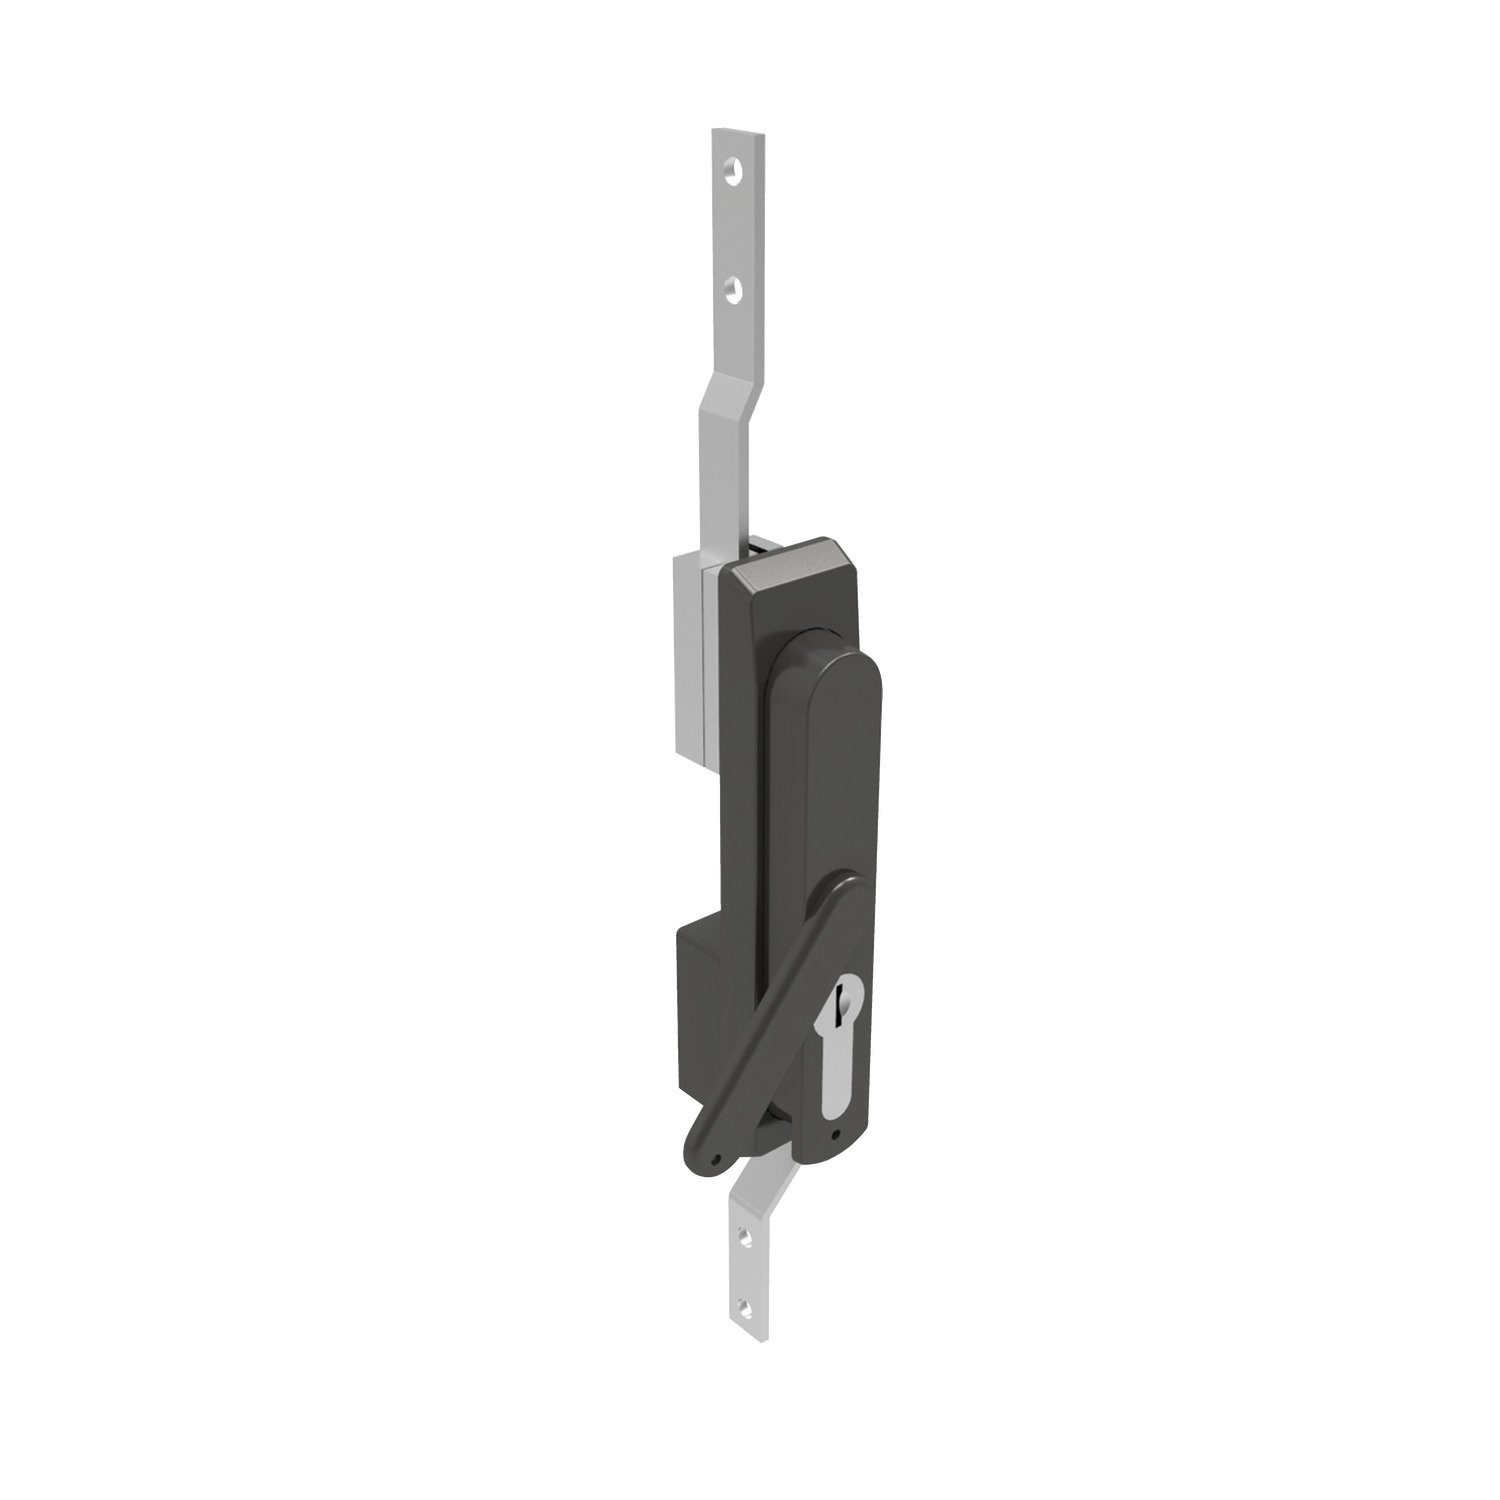 B2082.AW0020 Swing Handles with rod control